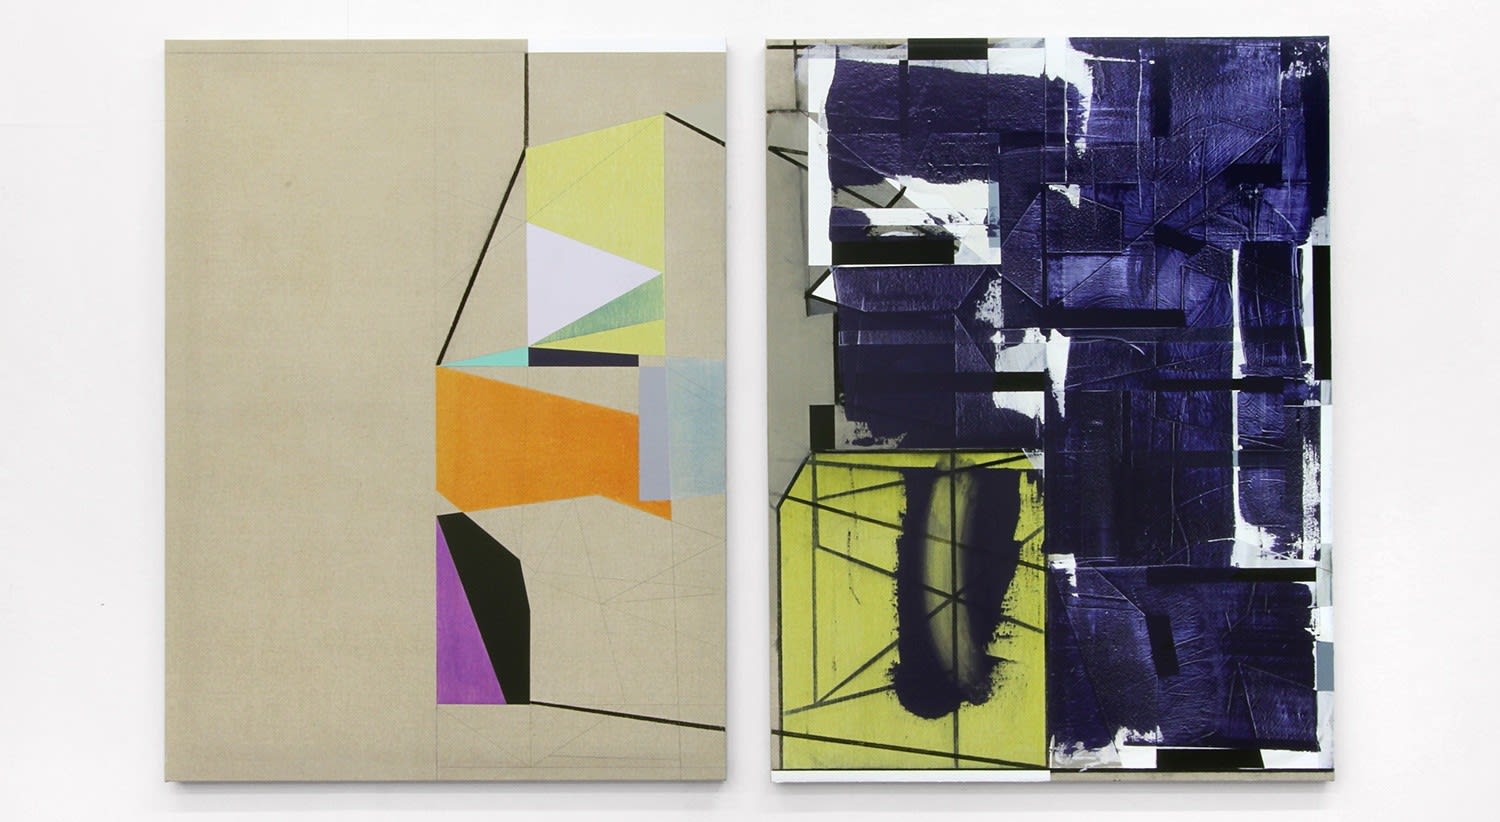 Andrew Bick, Variant t-s [shifted double echo], 2013-2014